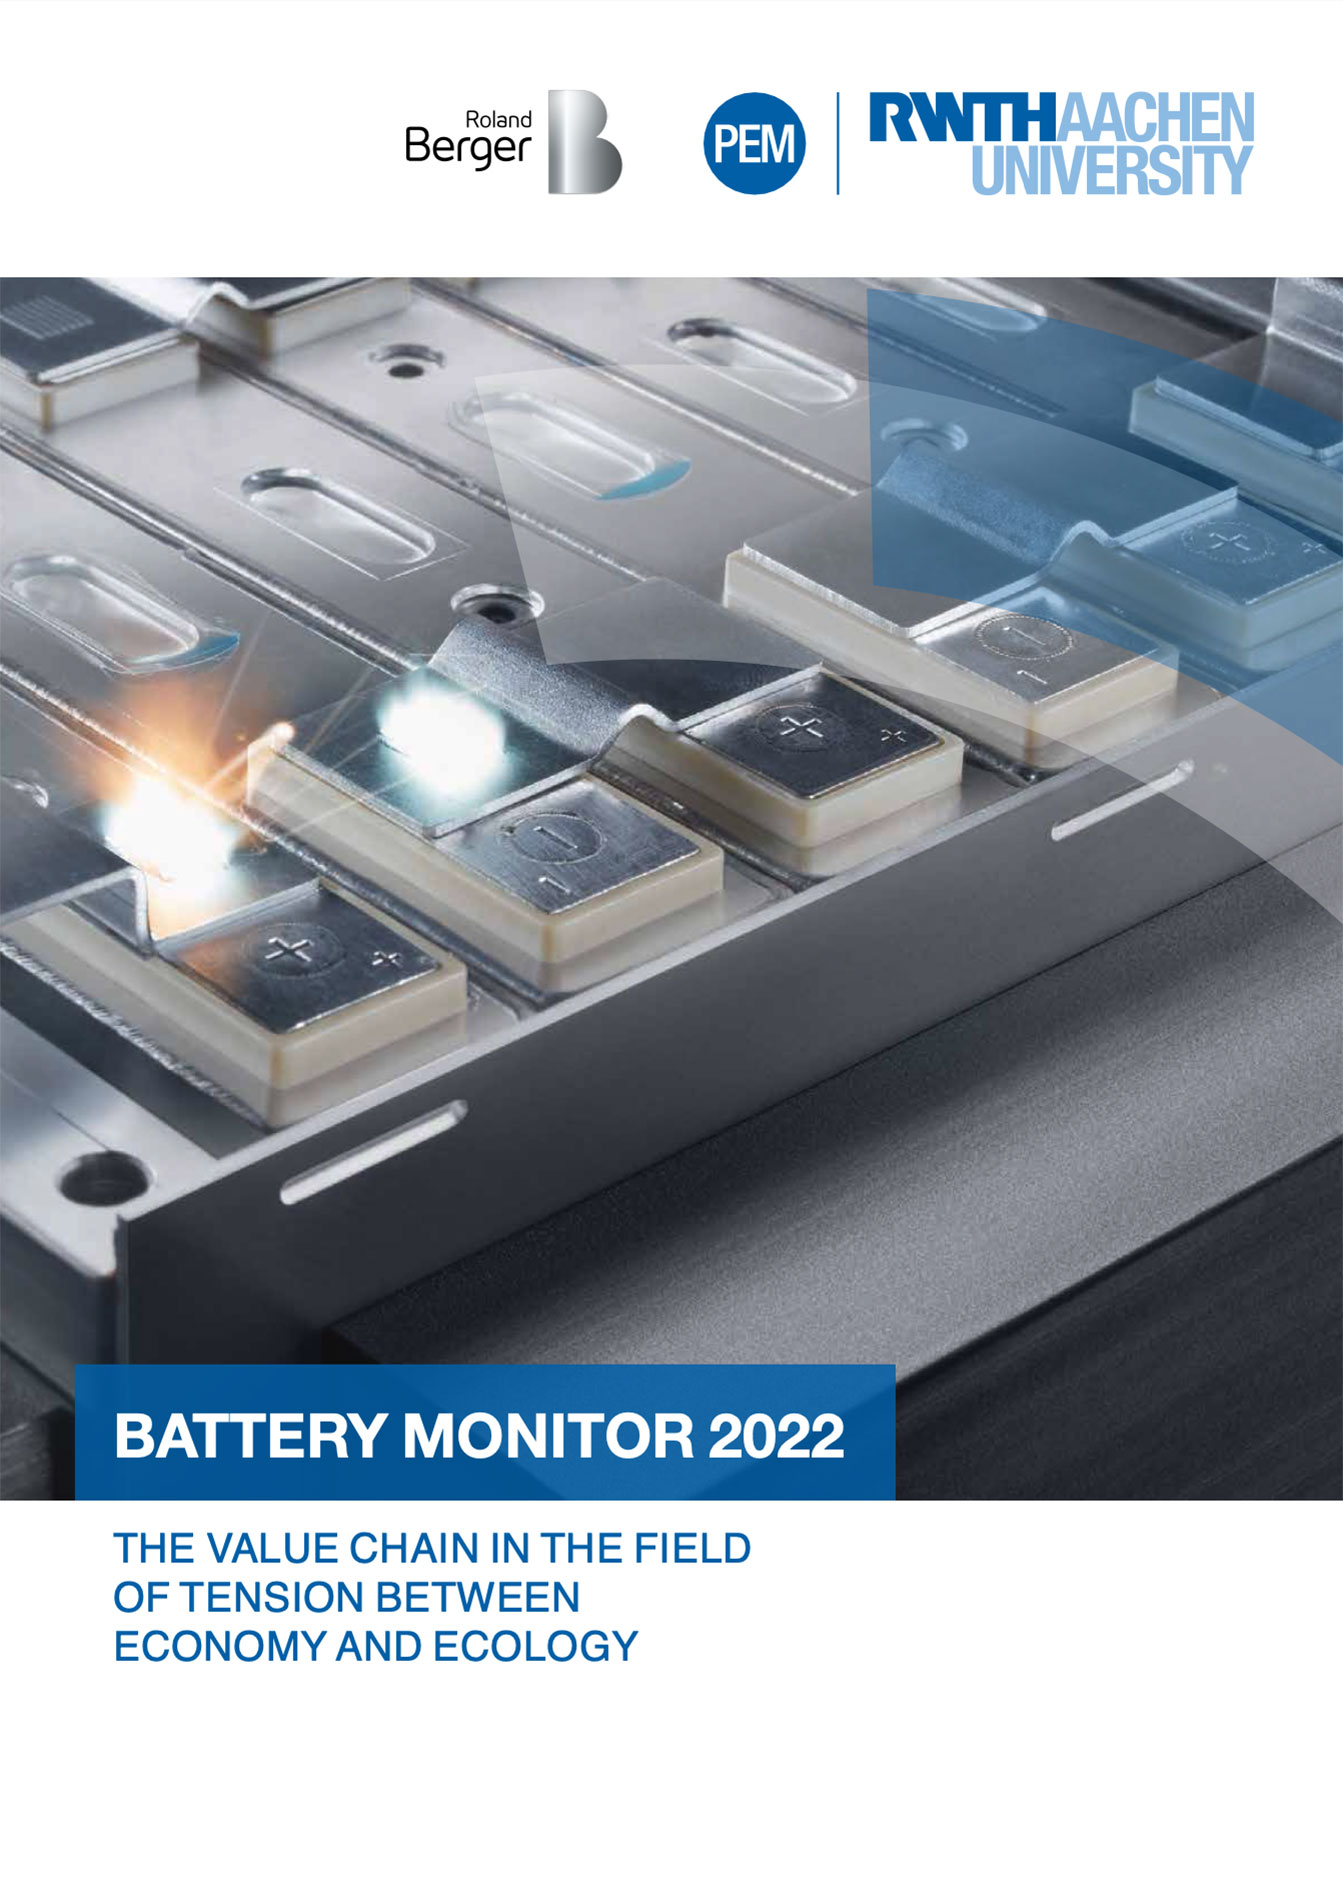 The Roland Berger Battery Monitor 2022